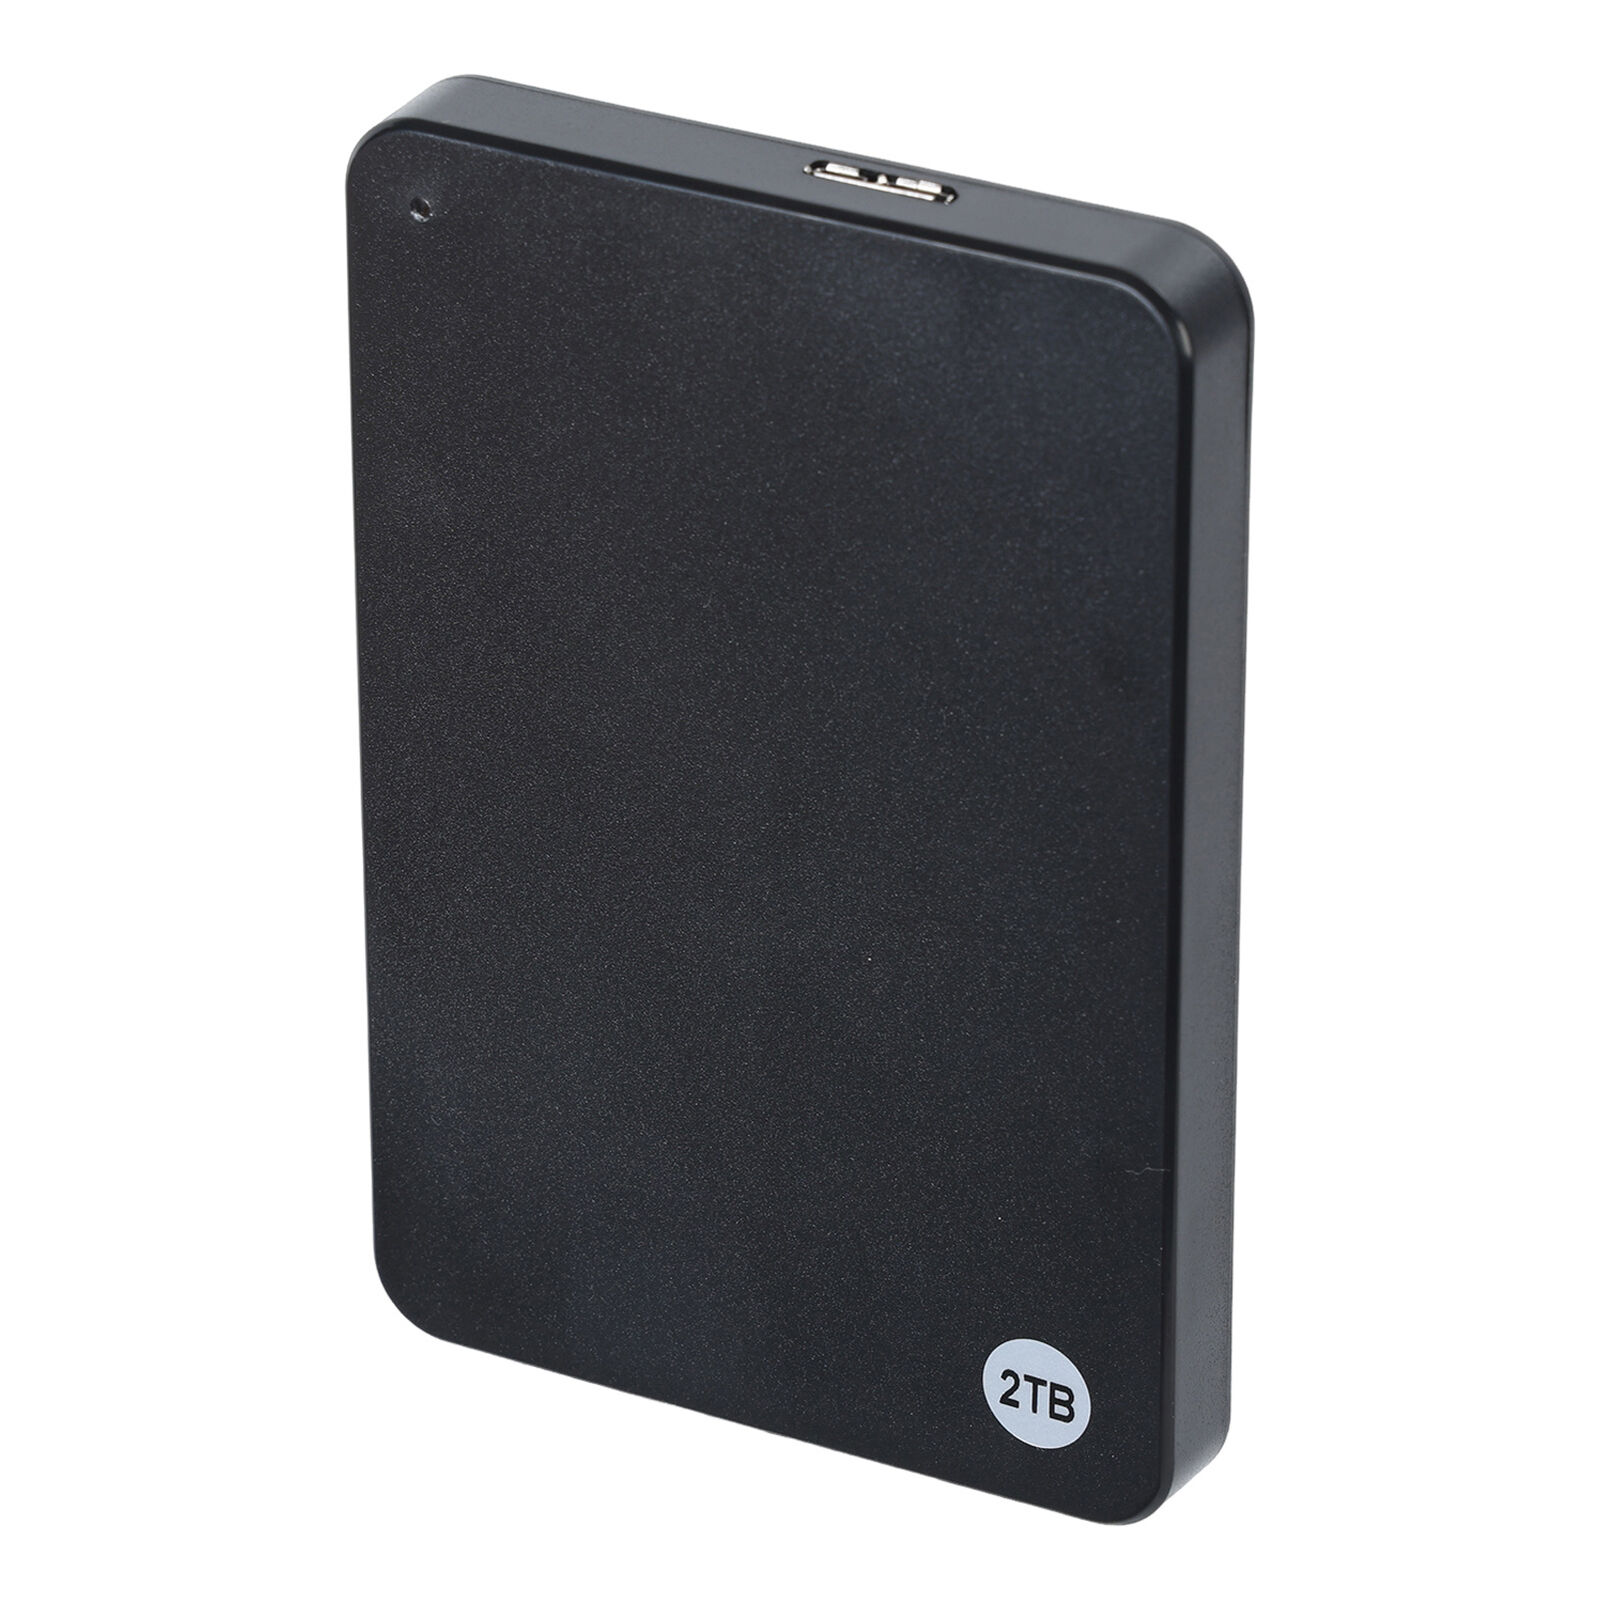 Protable 2.5inch Mobile Hard Drive Disk 2TB Mobile Storage Drive for Laptops